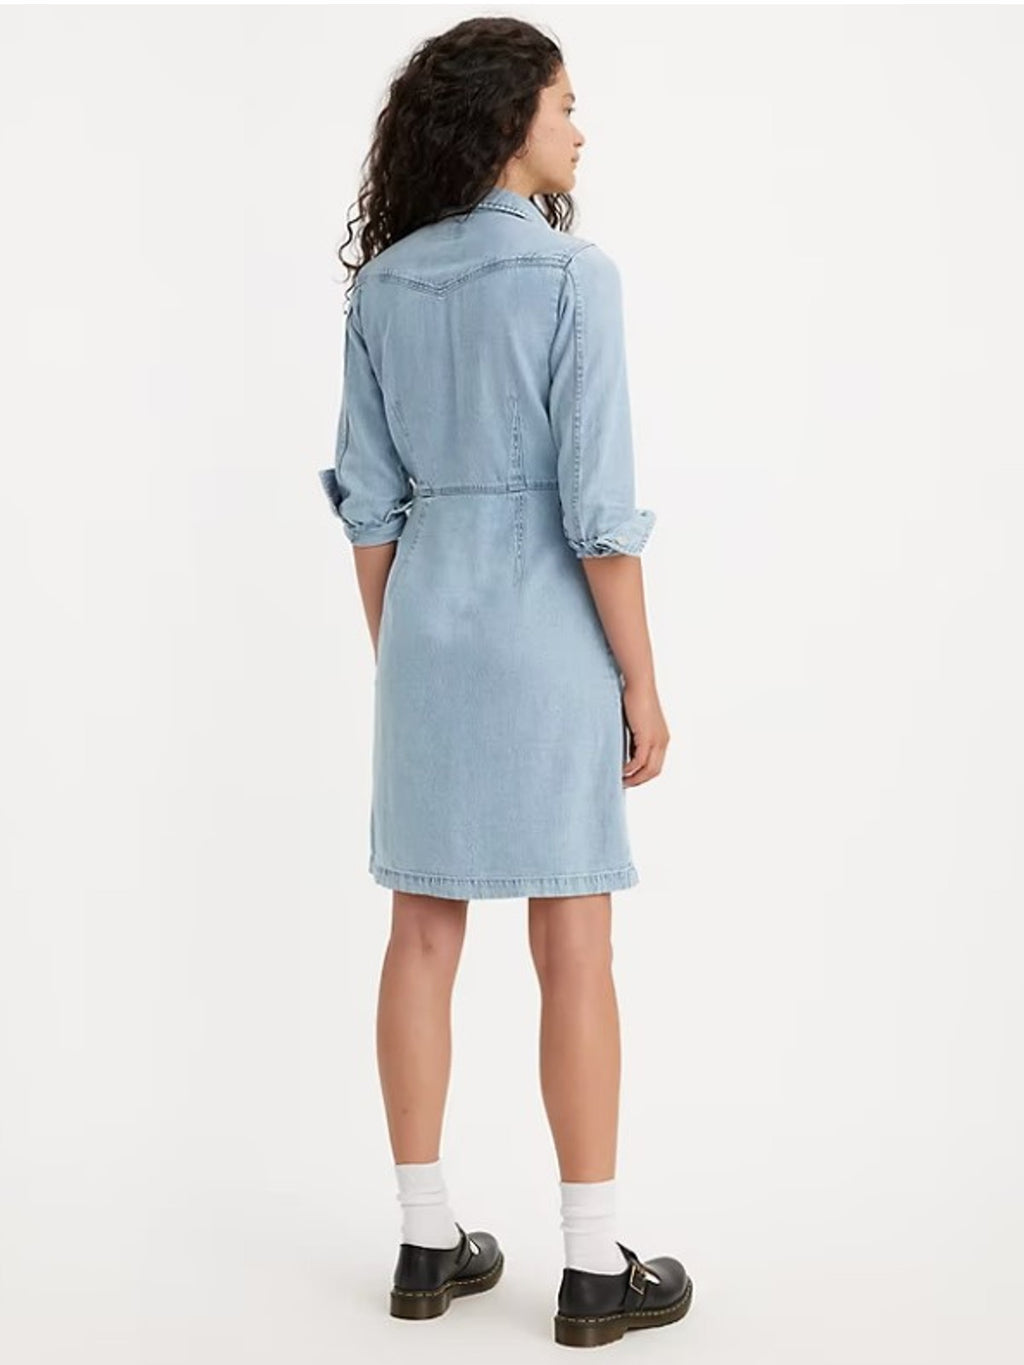 Levi's Otto Western Dress in Hip To Be Squared